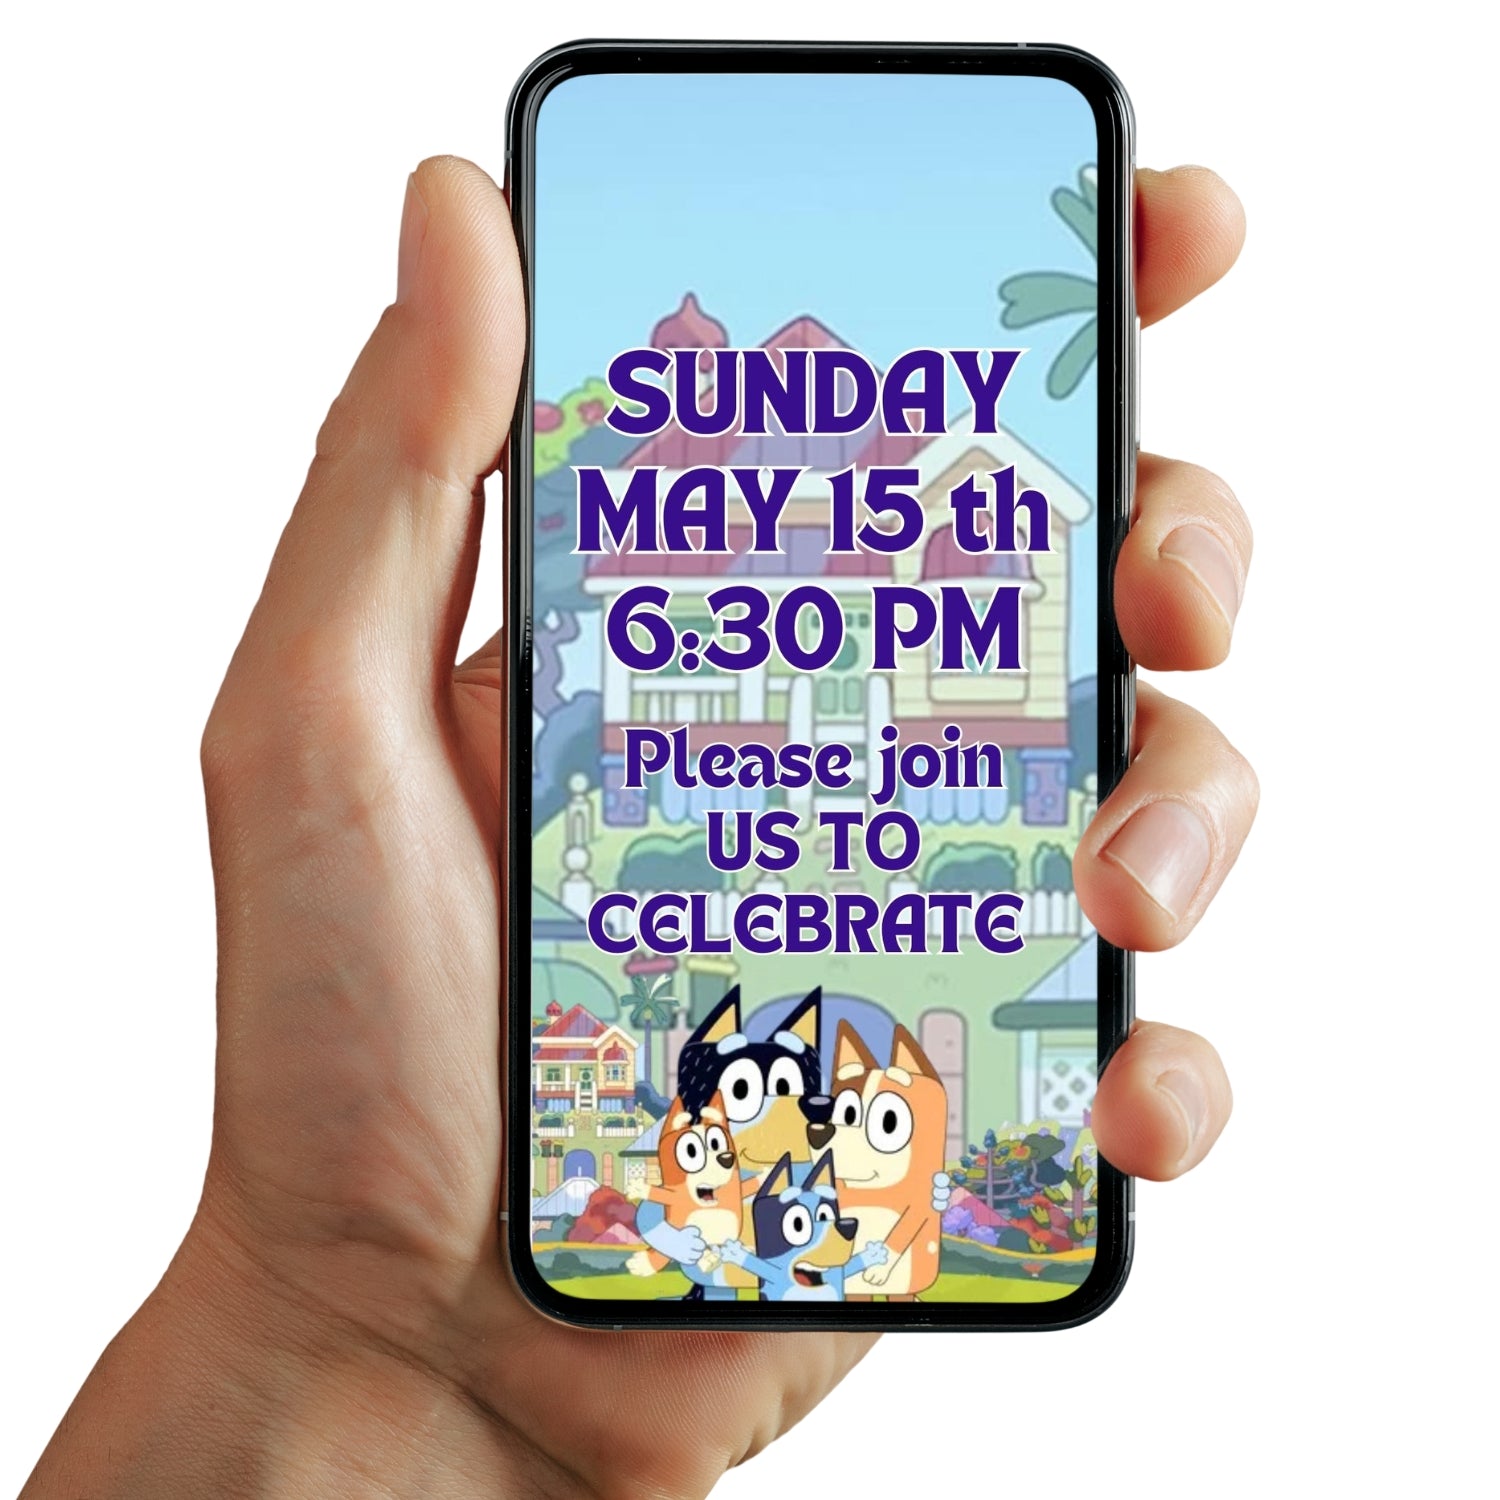 Animated Bingo Video Birthday Invitation | Fun-filled Online Celebration with Friends and Family